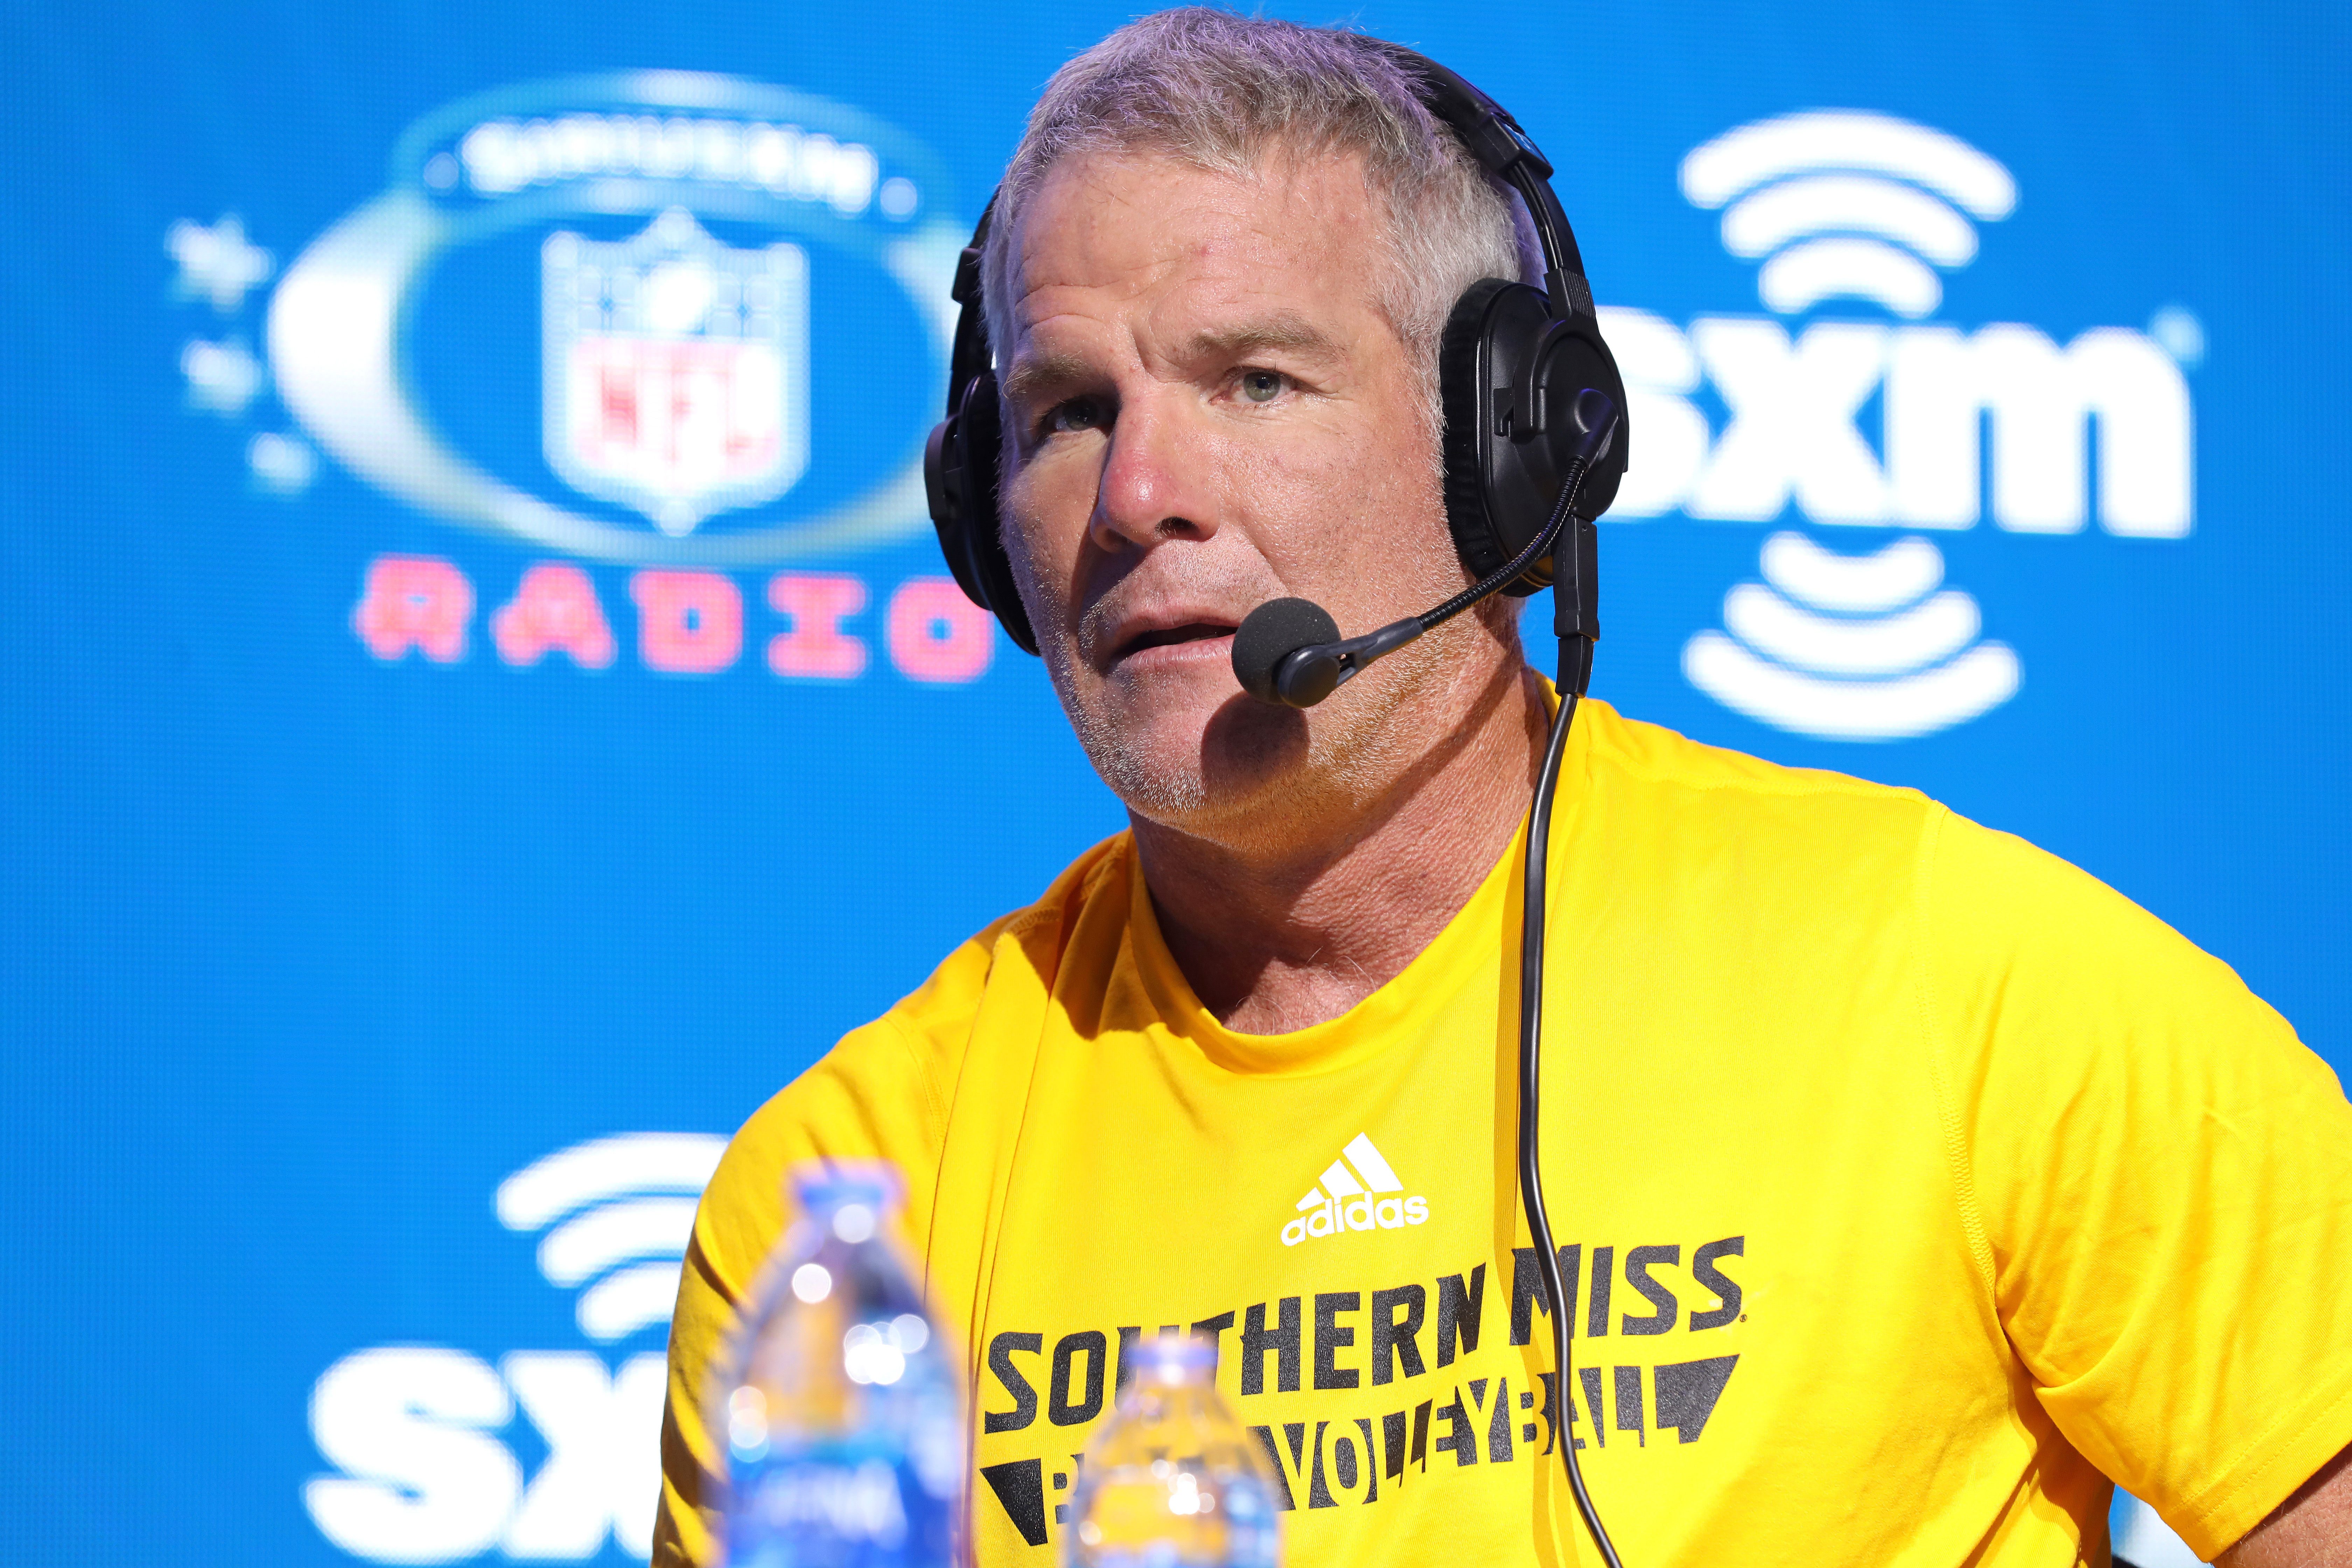 Brett Favre Doesn’t Believe Chauvin “Intentionally Meant To Kill George Floyd”